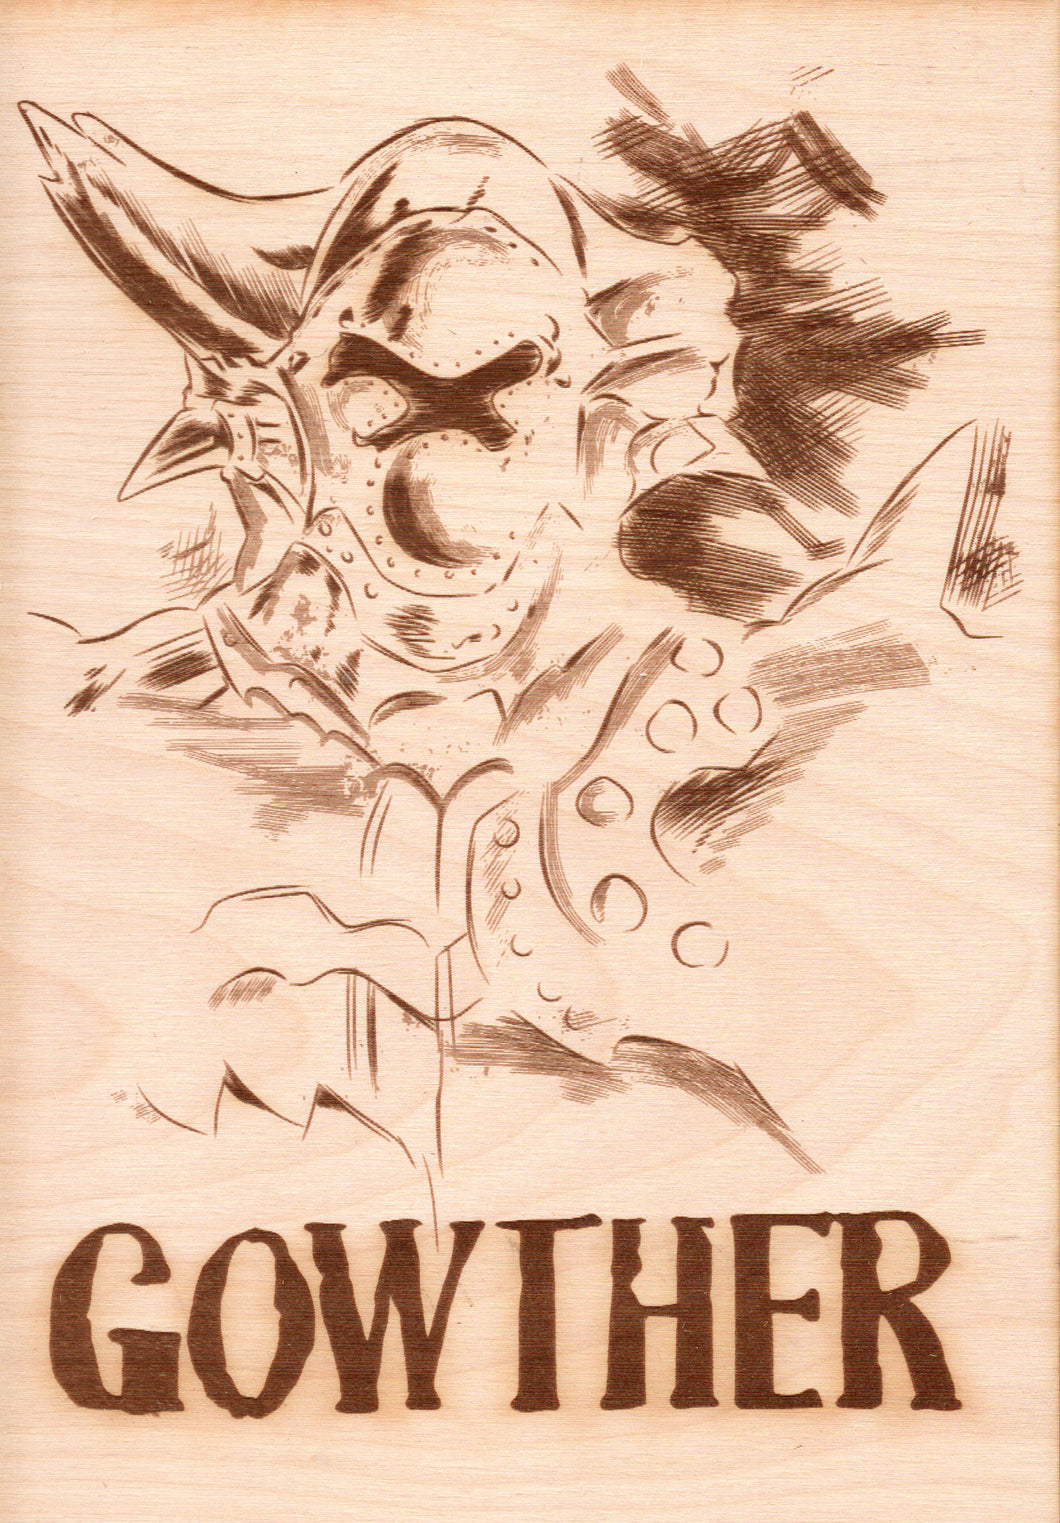 Seven Deadly Sins - Gowther Wooden Wanted Poster - TantrumCollectibles.com